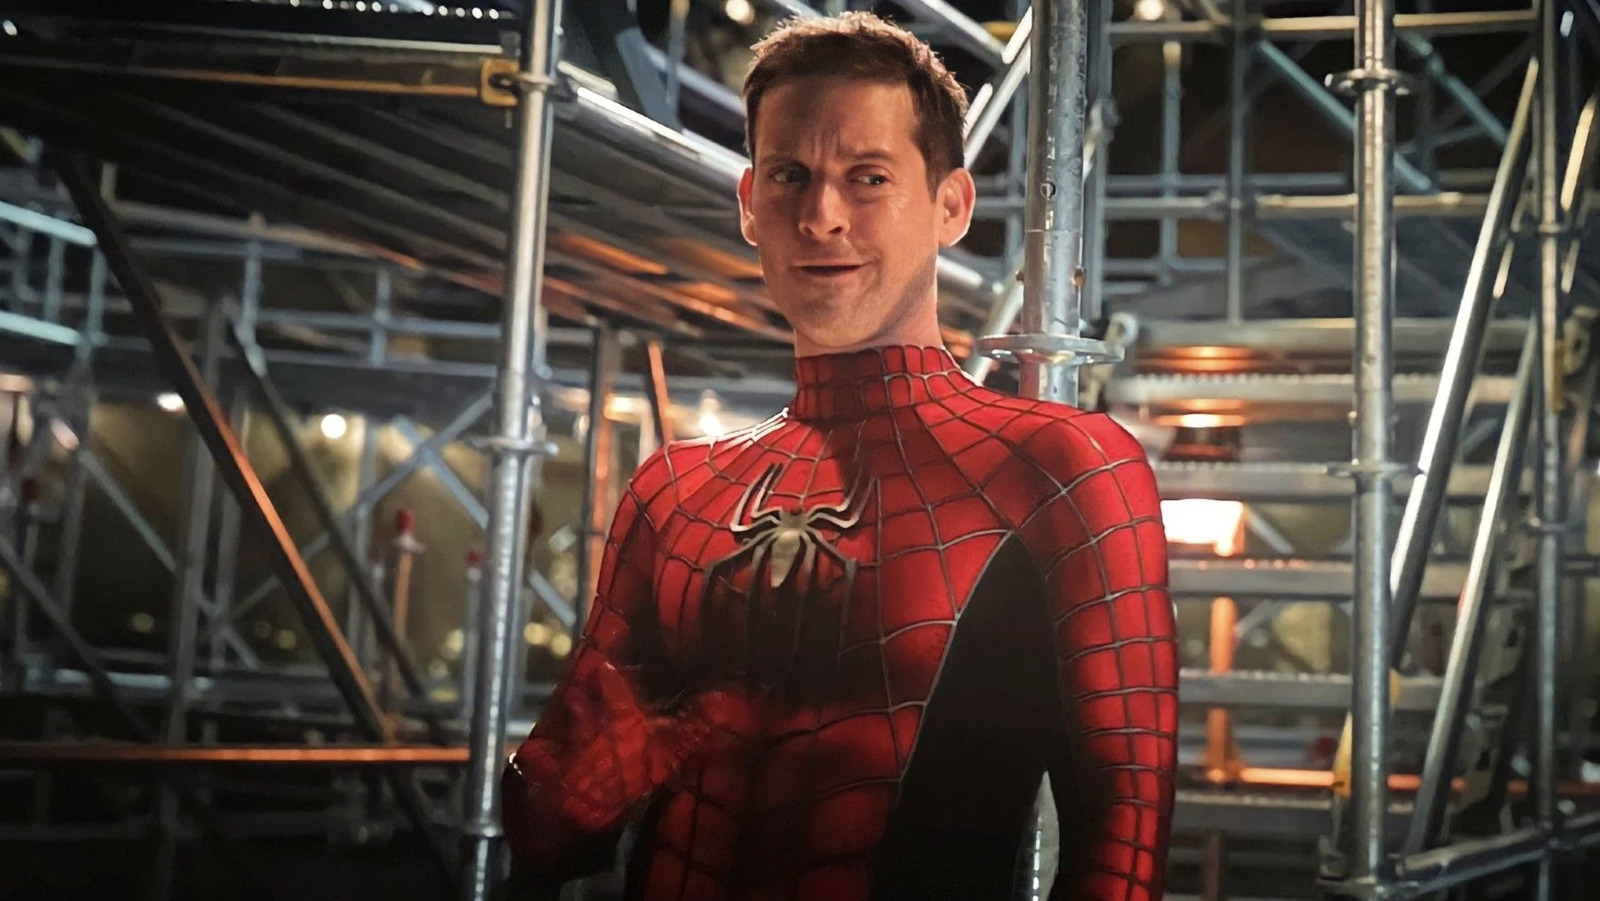 #Here’s How Sam Raimi Reacted To Seeing Tobey Maguire Play Peter Parker Again In Spider-Man: No Way Home